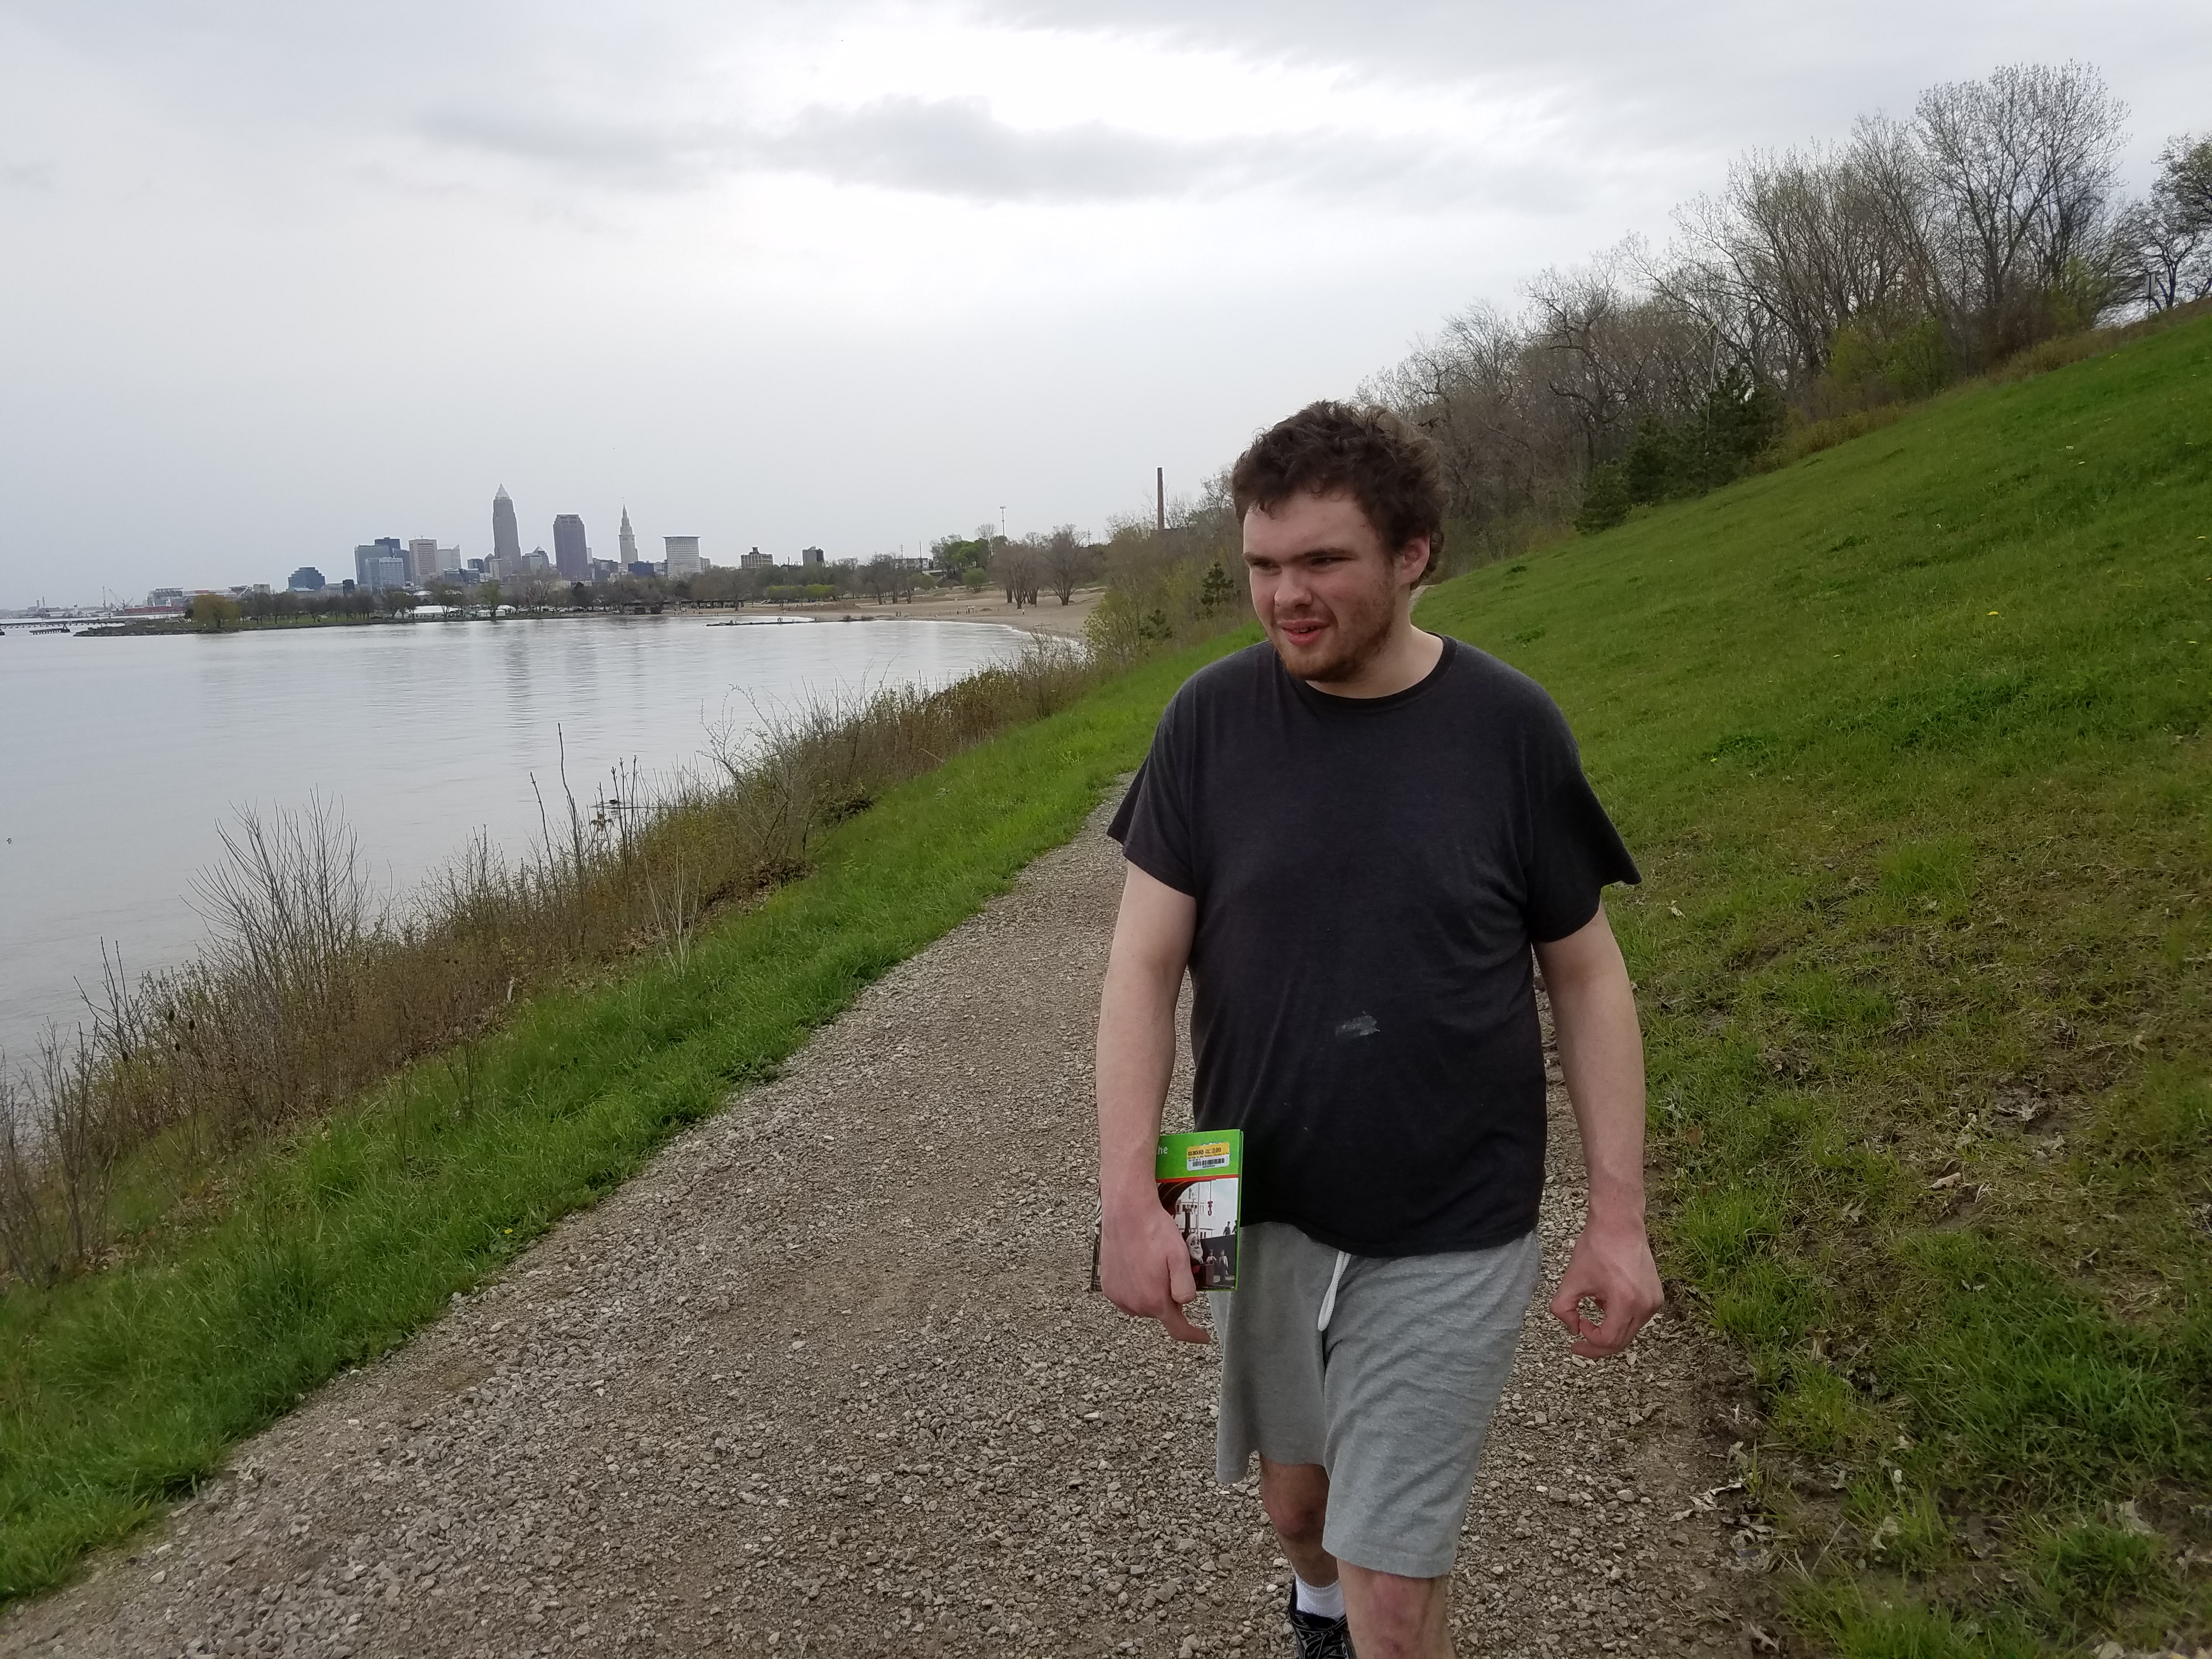 Ben and I enjoyed dodging raindrops on the Edgewater Park trail with Cleveland on the Lake Erie shore behind him.